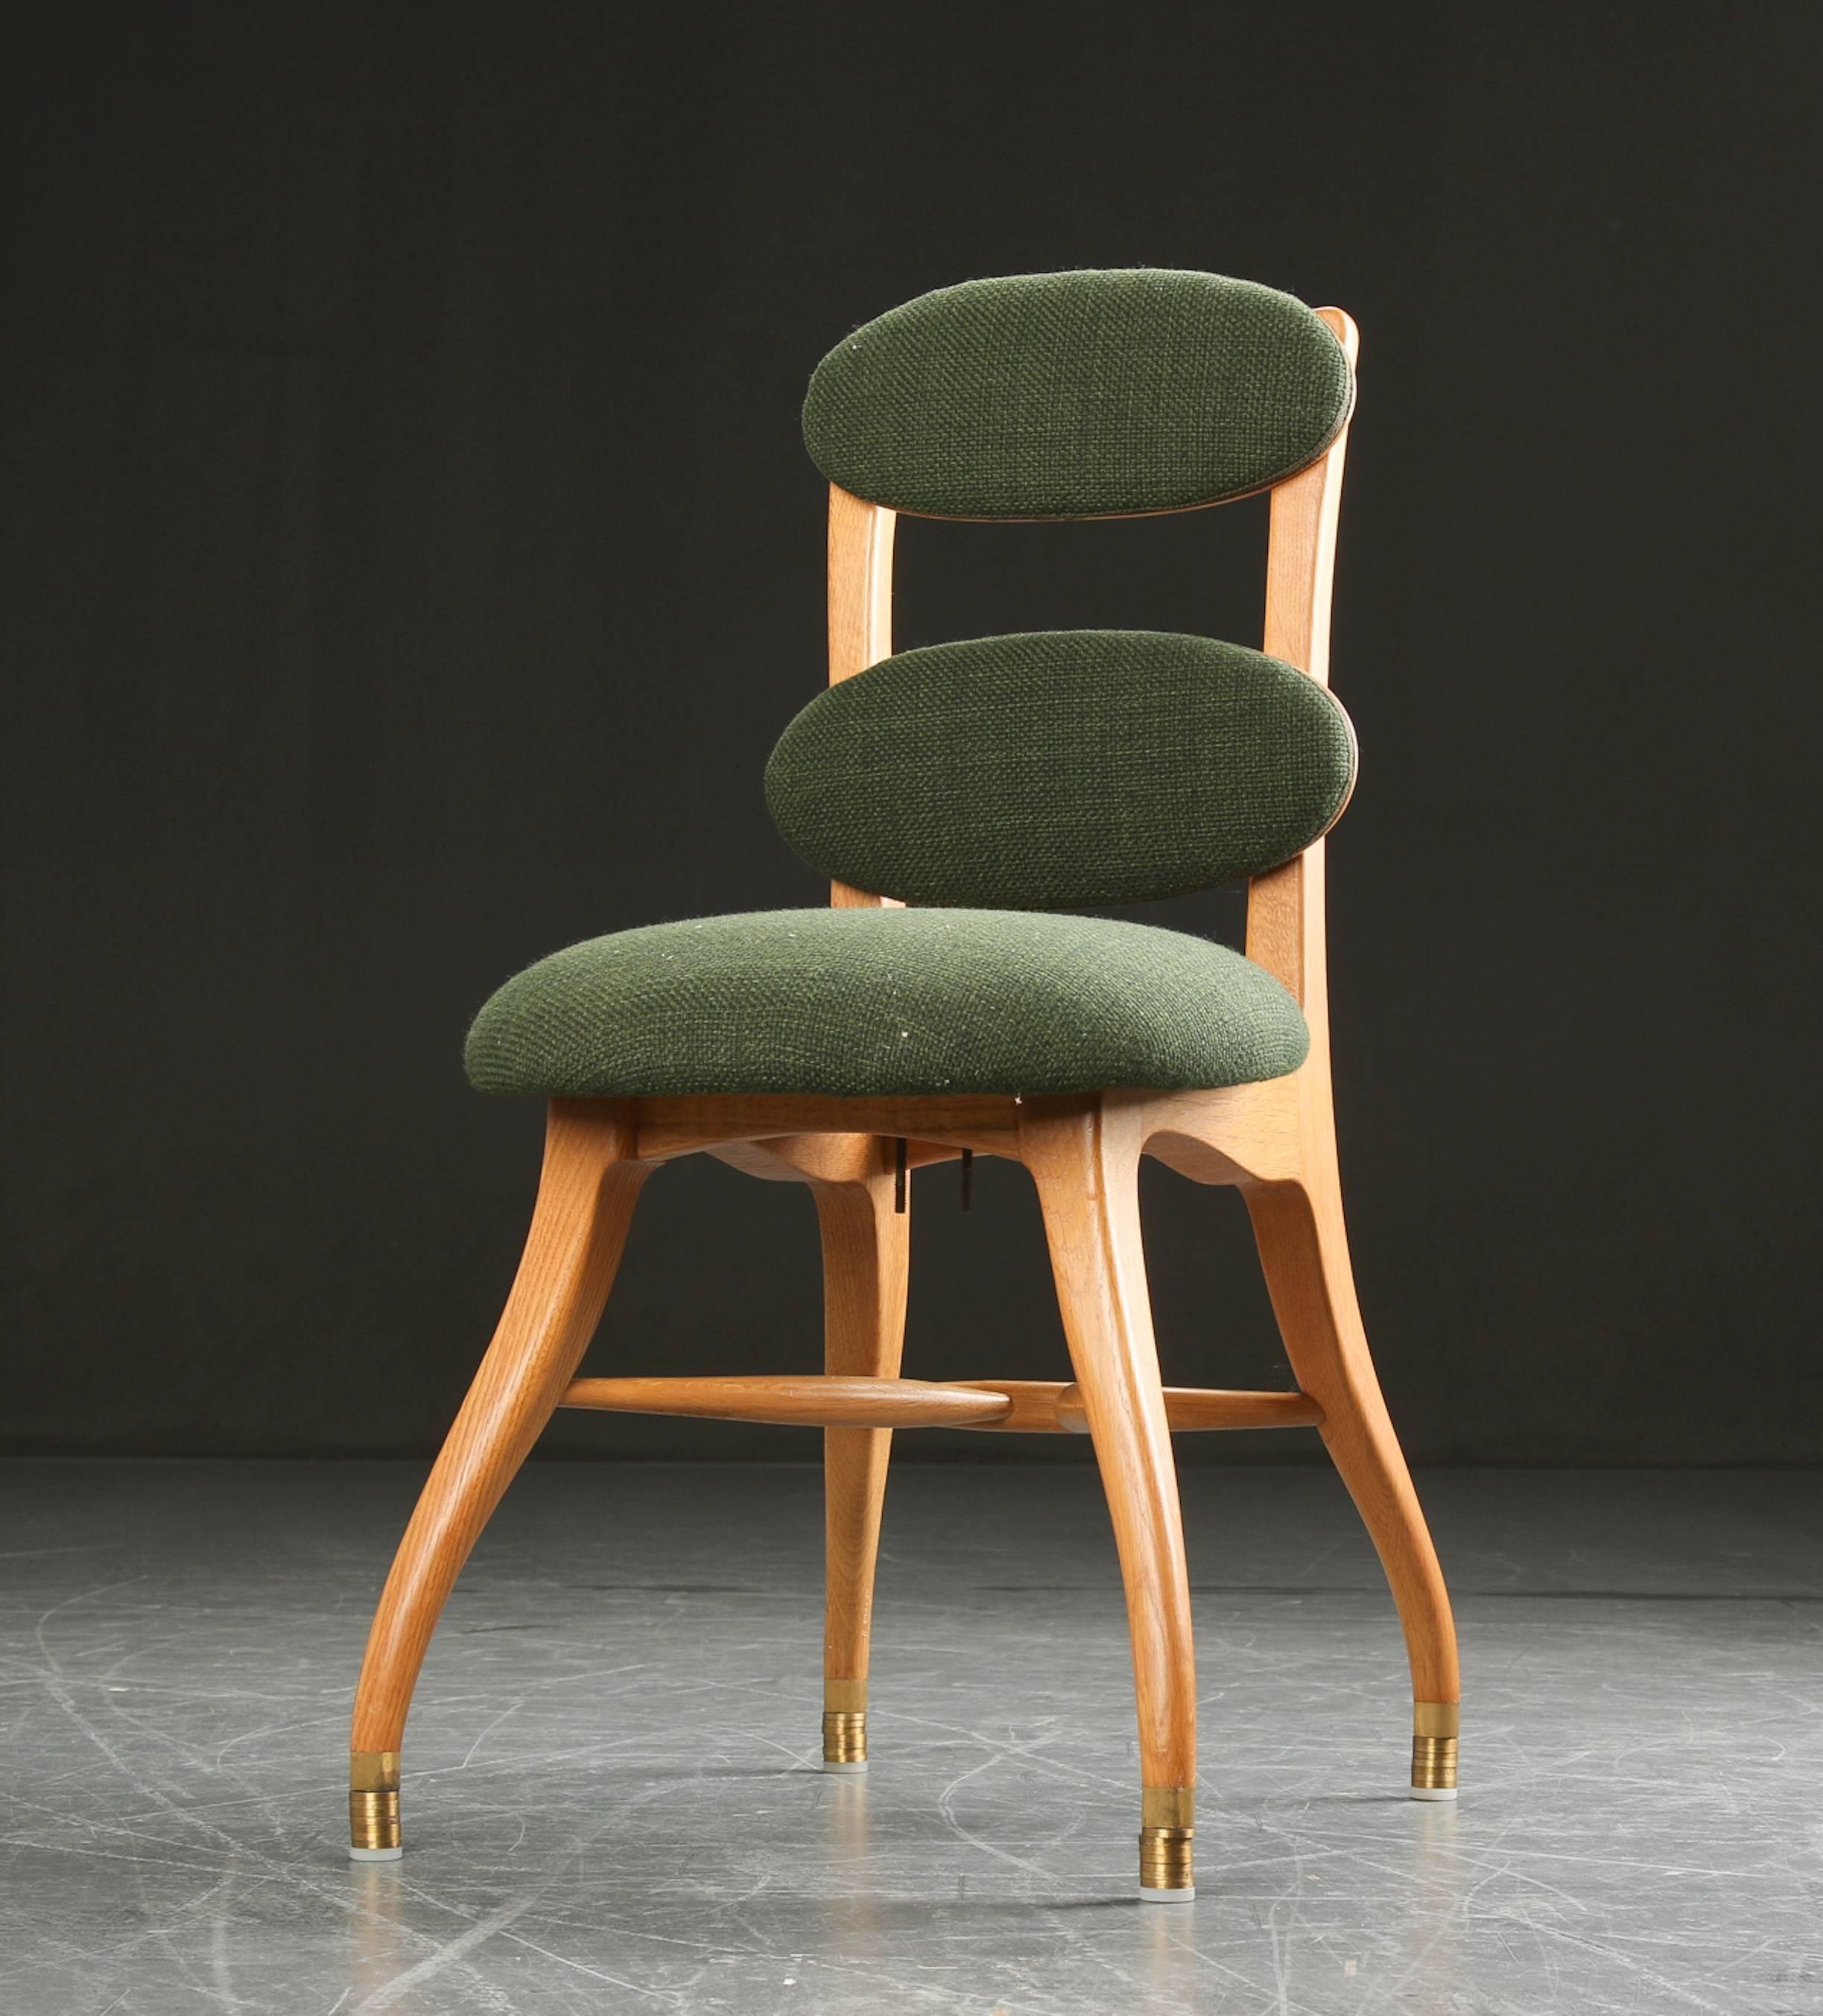 A musician chair with oak frame, seat and back mounted with wool. Adjustable seat and back. Brass fittings on the legs. Frequently used by the Danish radio symphony orchestra. Natural patina. Measures: adjustable.